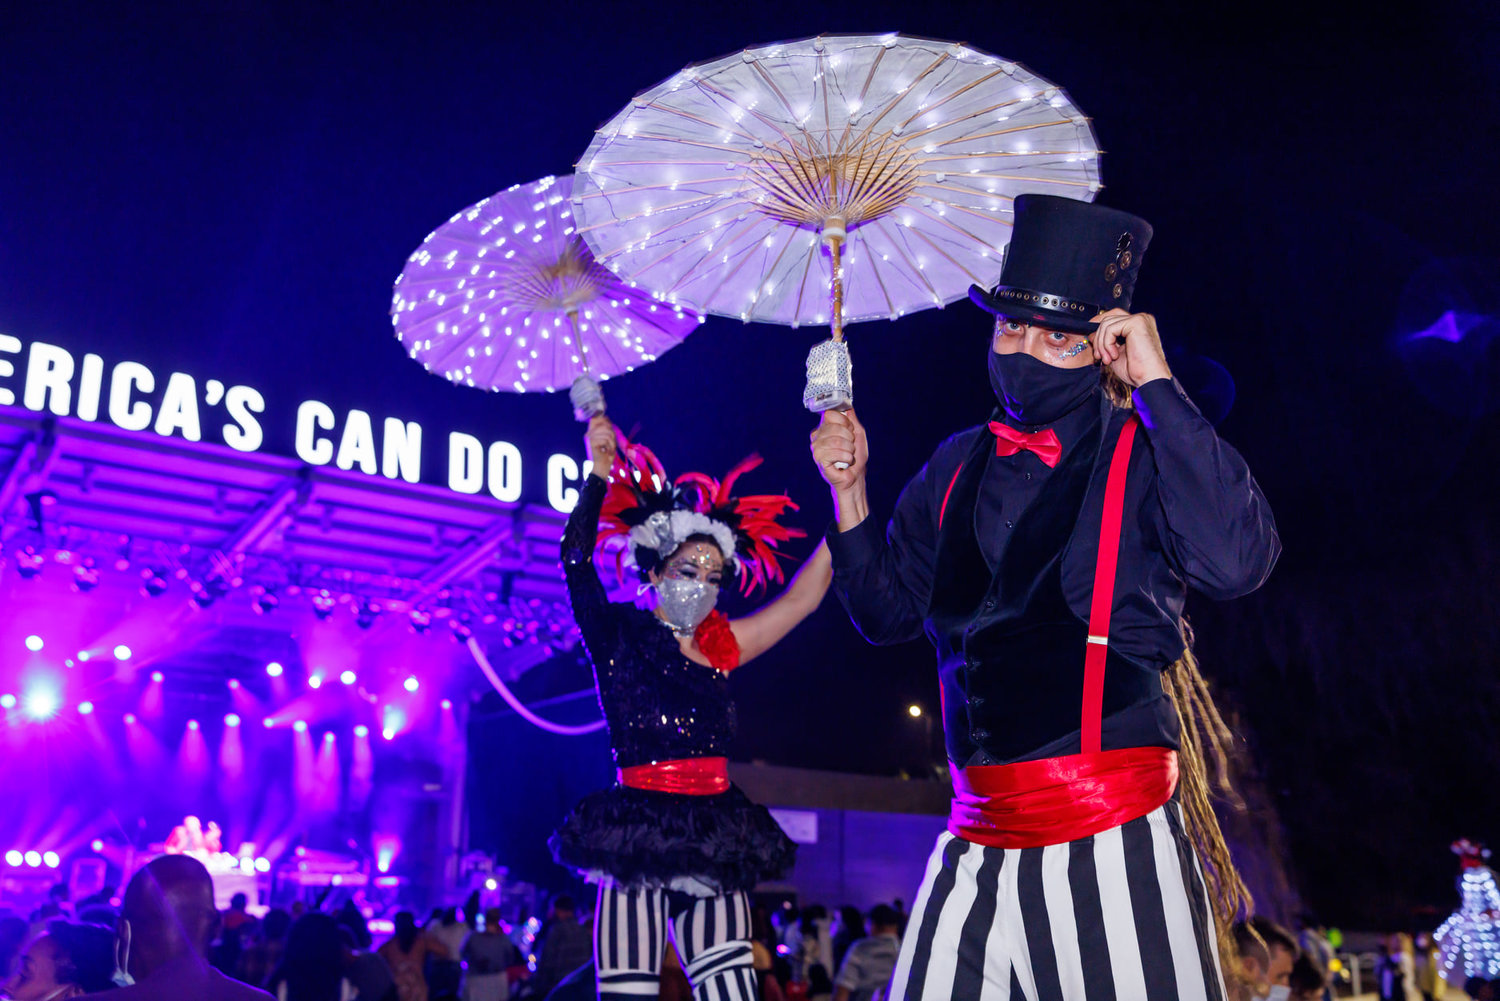 Night Circus: A District New Year’s Eve Spectacular will return for a second year, the Cool Spring Downtown District and the city of Fayetteville said in a release. The night will include carnival attractions such as stilt walkers, fire dancers and roving magicians. There also will be food trucks and live music, the release said.